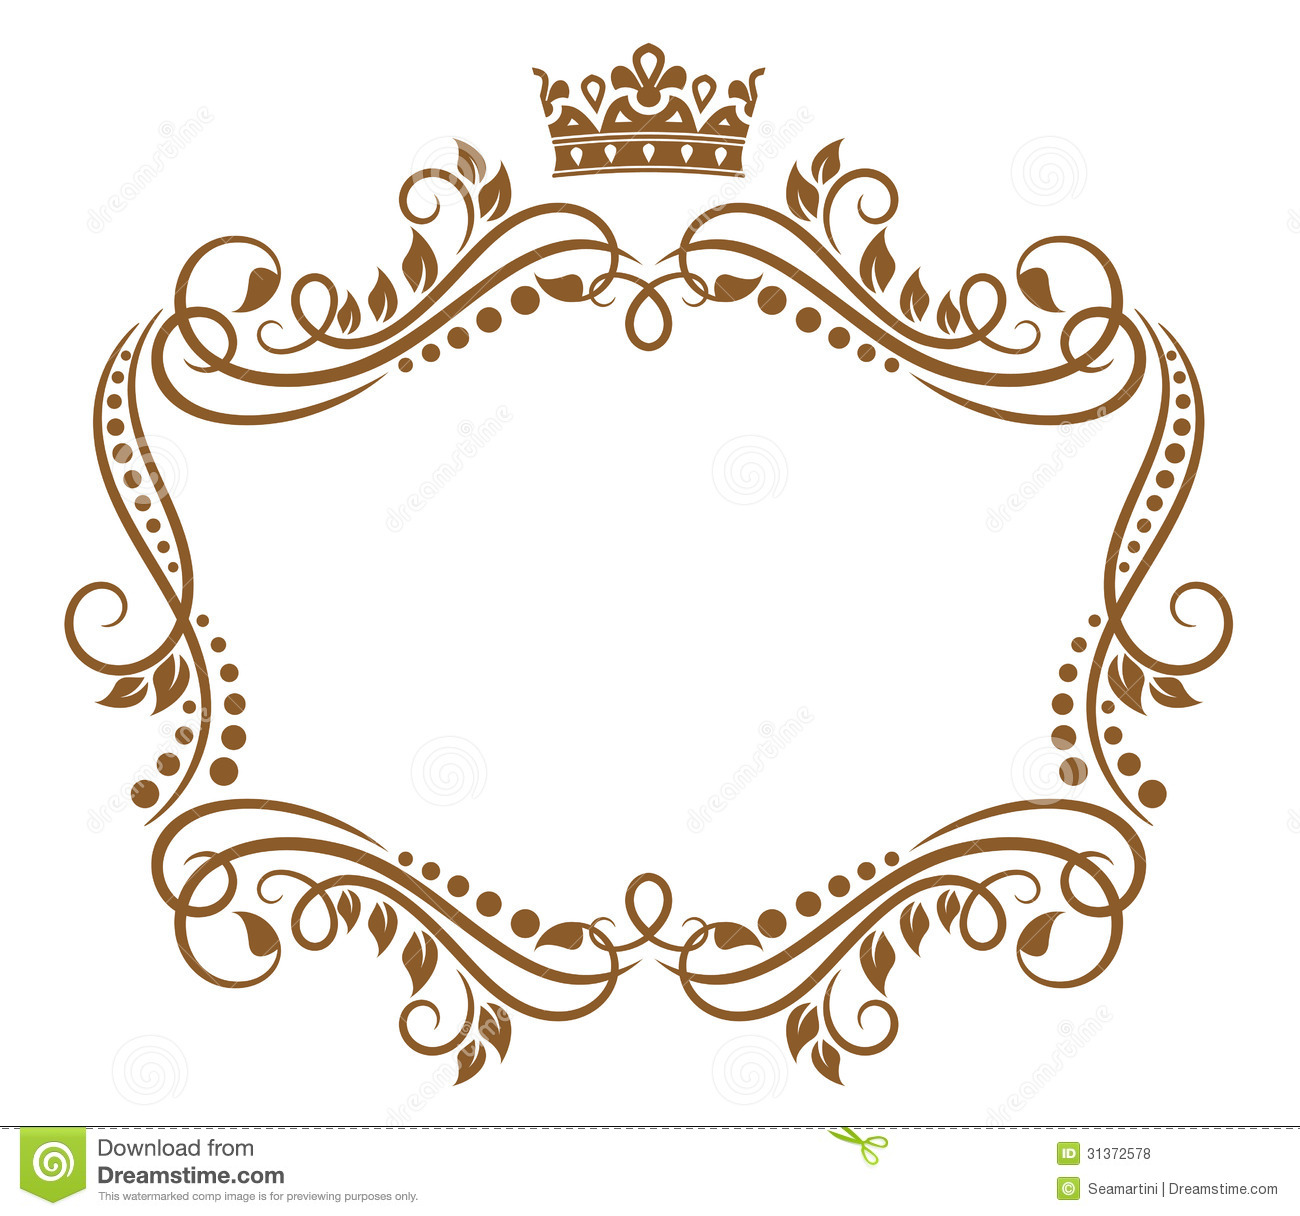 Royalty Free Stock Photos  Retro Frame With Royal Crown